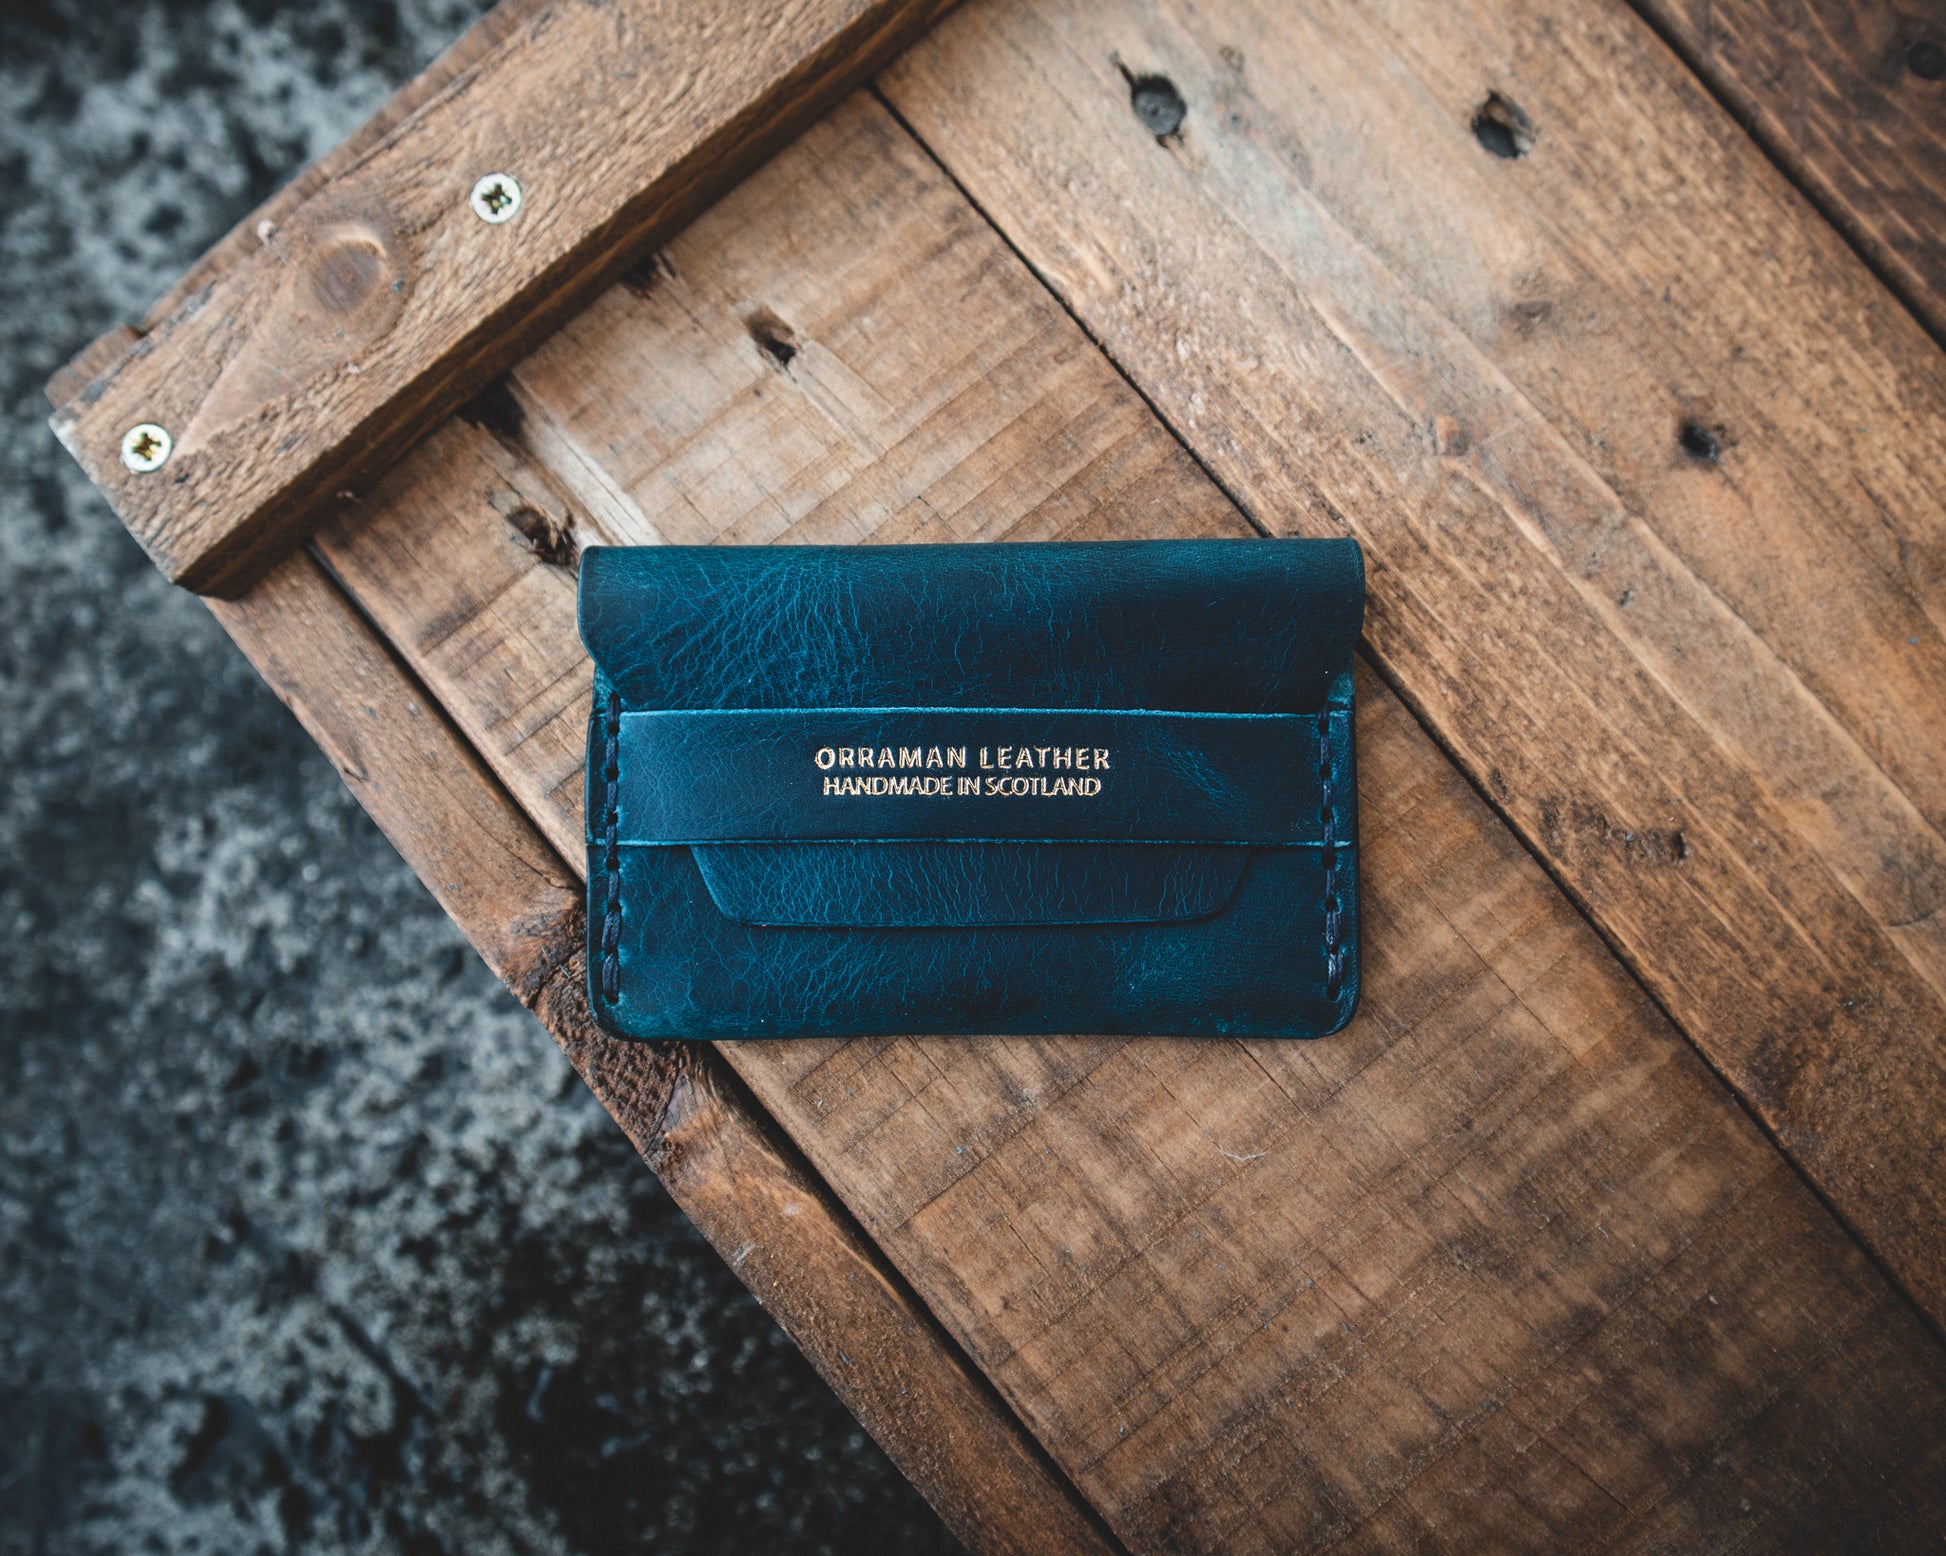 Handmade Men's Lomond Wallet - Personalised | Leather EDC Cardholder Atlantic Storm | Handcrafted in Scotland by Orraman Leather